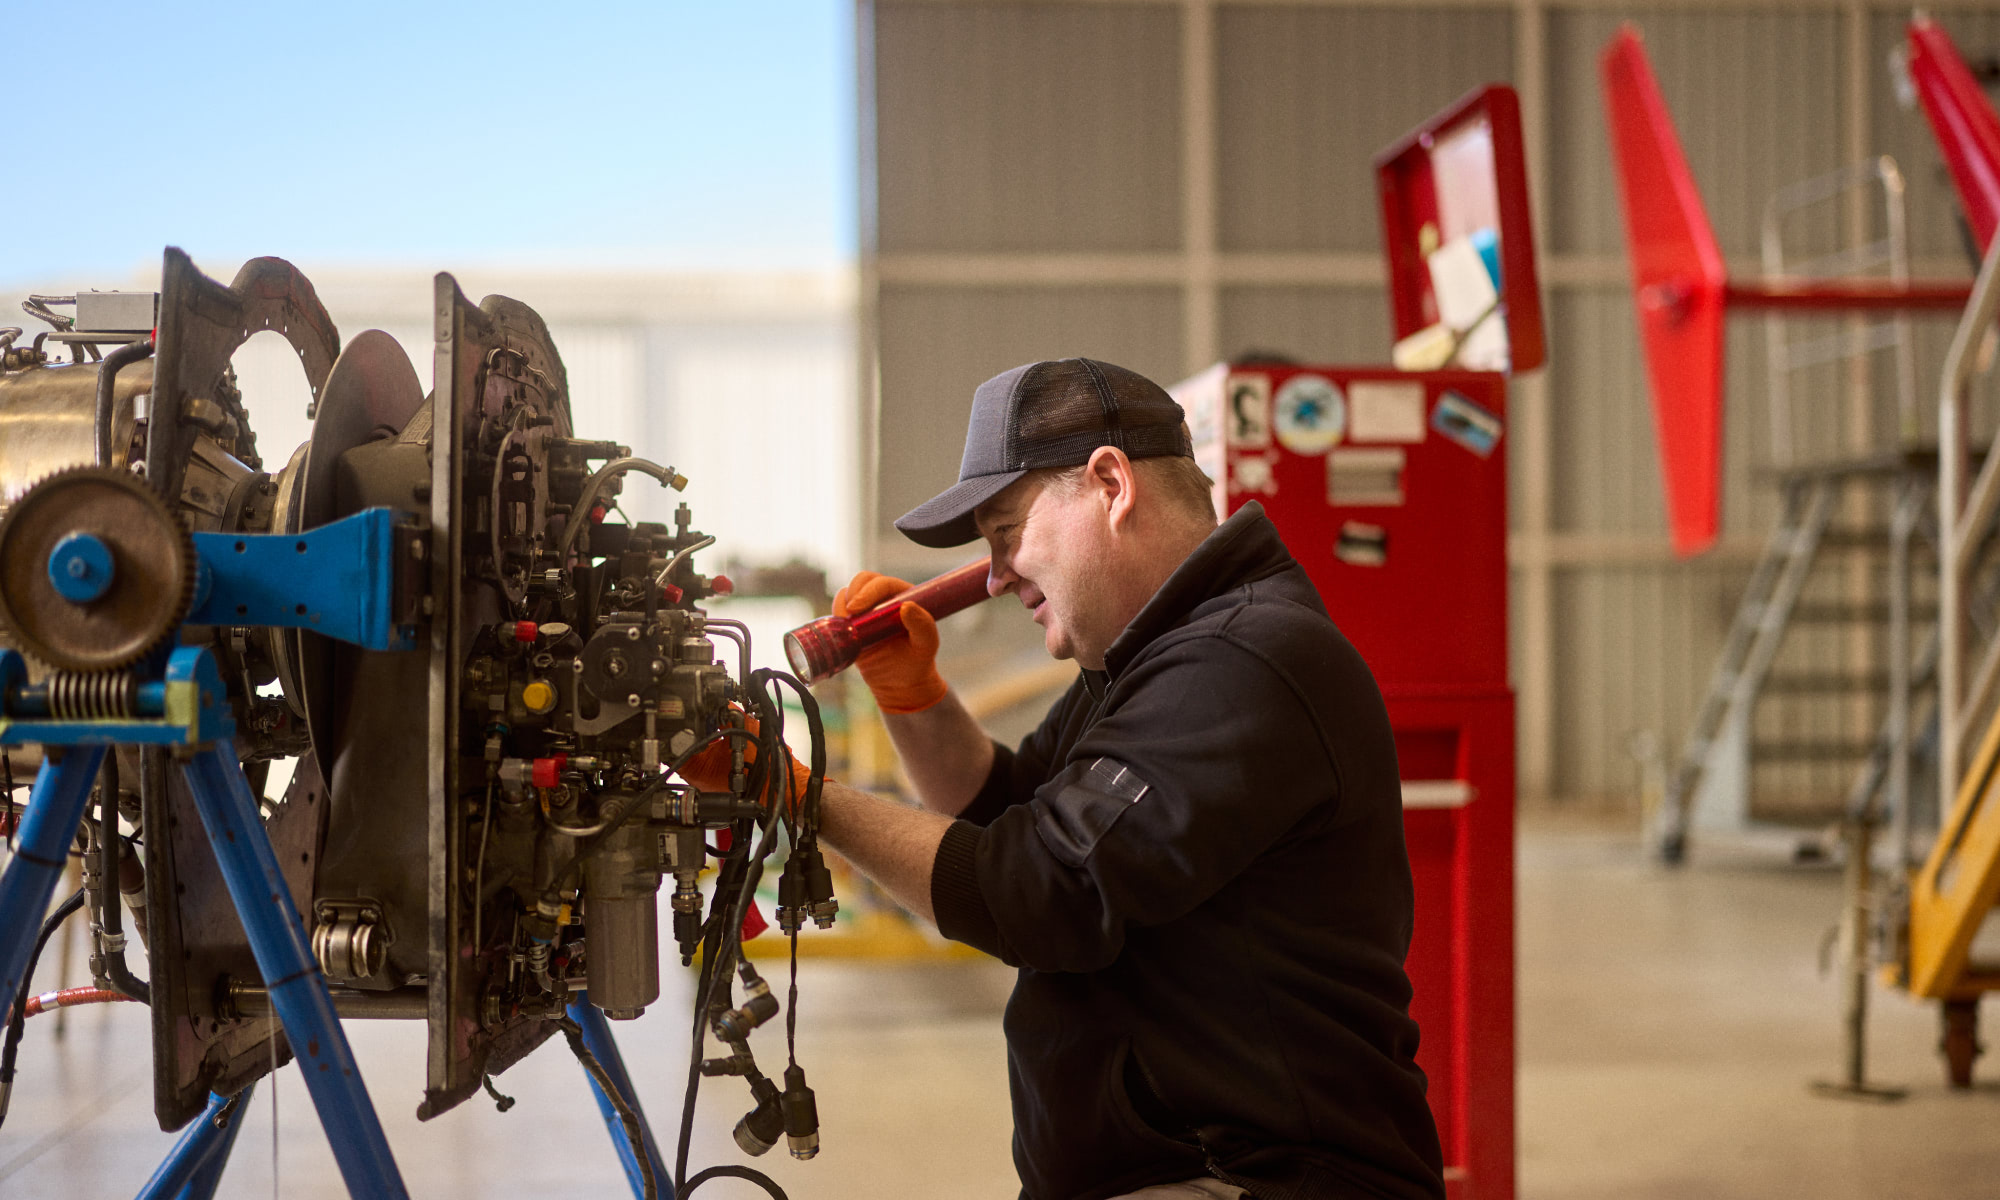 Ardmore male aviation technician working on engine with tool box in the background